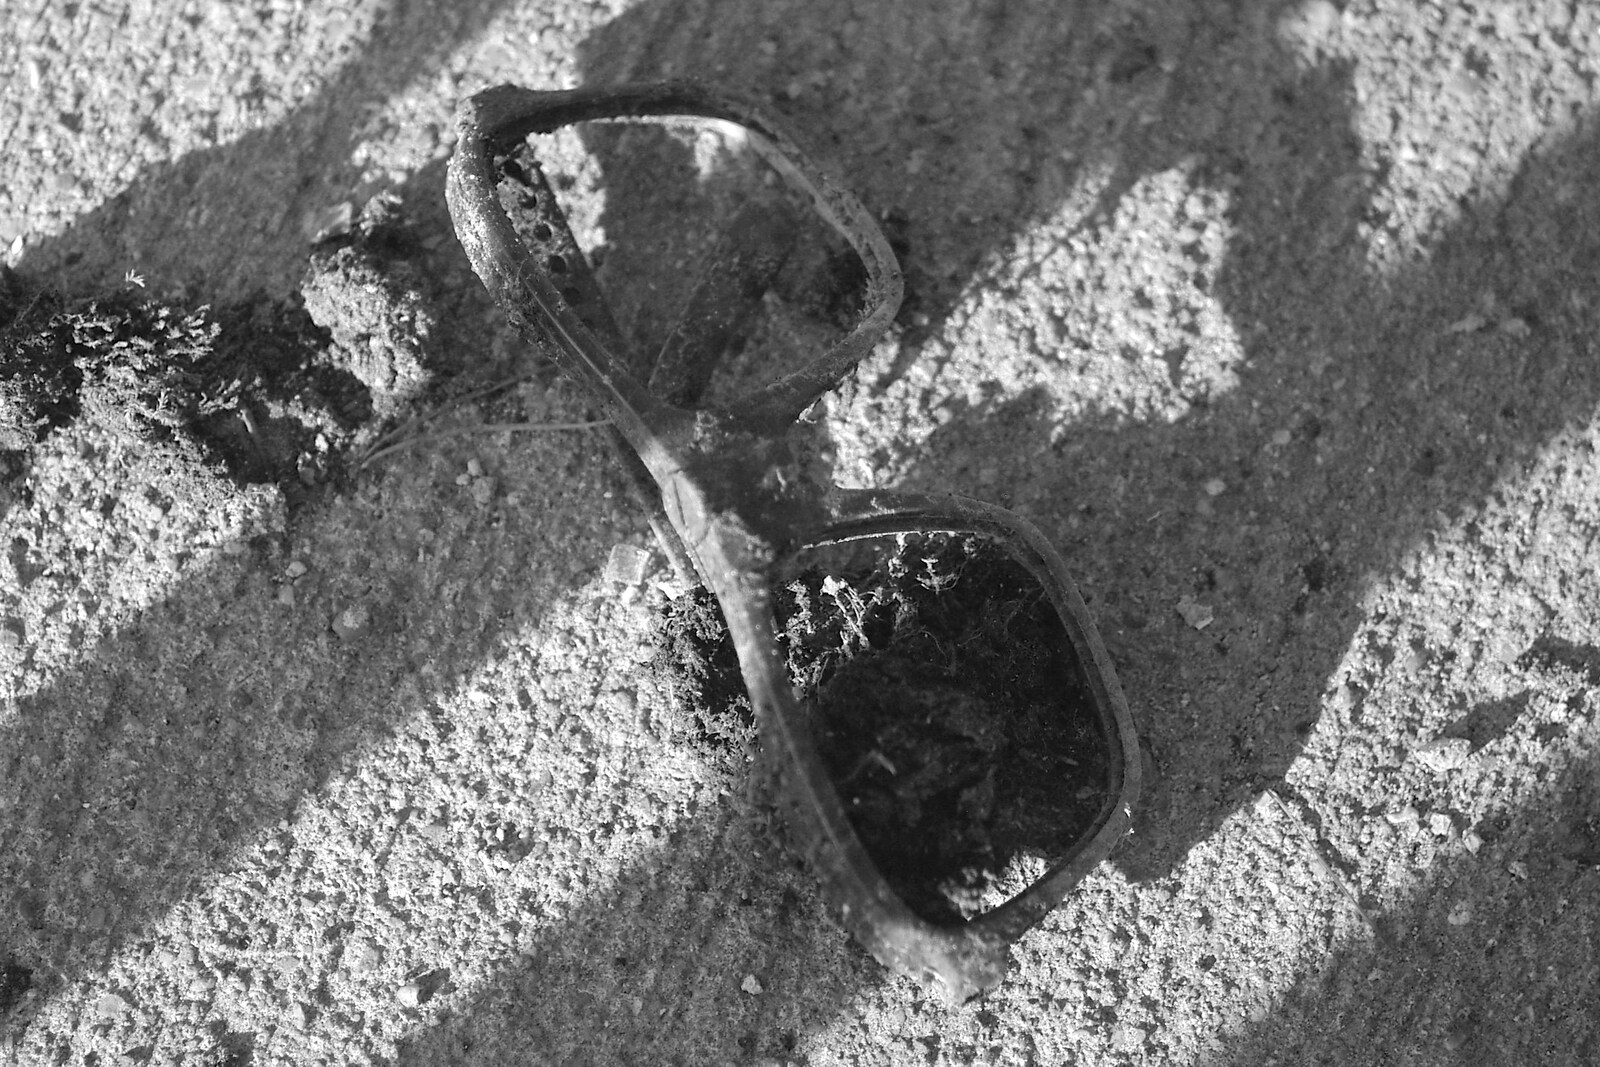 discarded sunglasses from The Destruction of Padley's, and Alex Hill at the Barrel, Diss and Banham - 12th November 2005